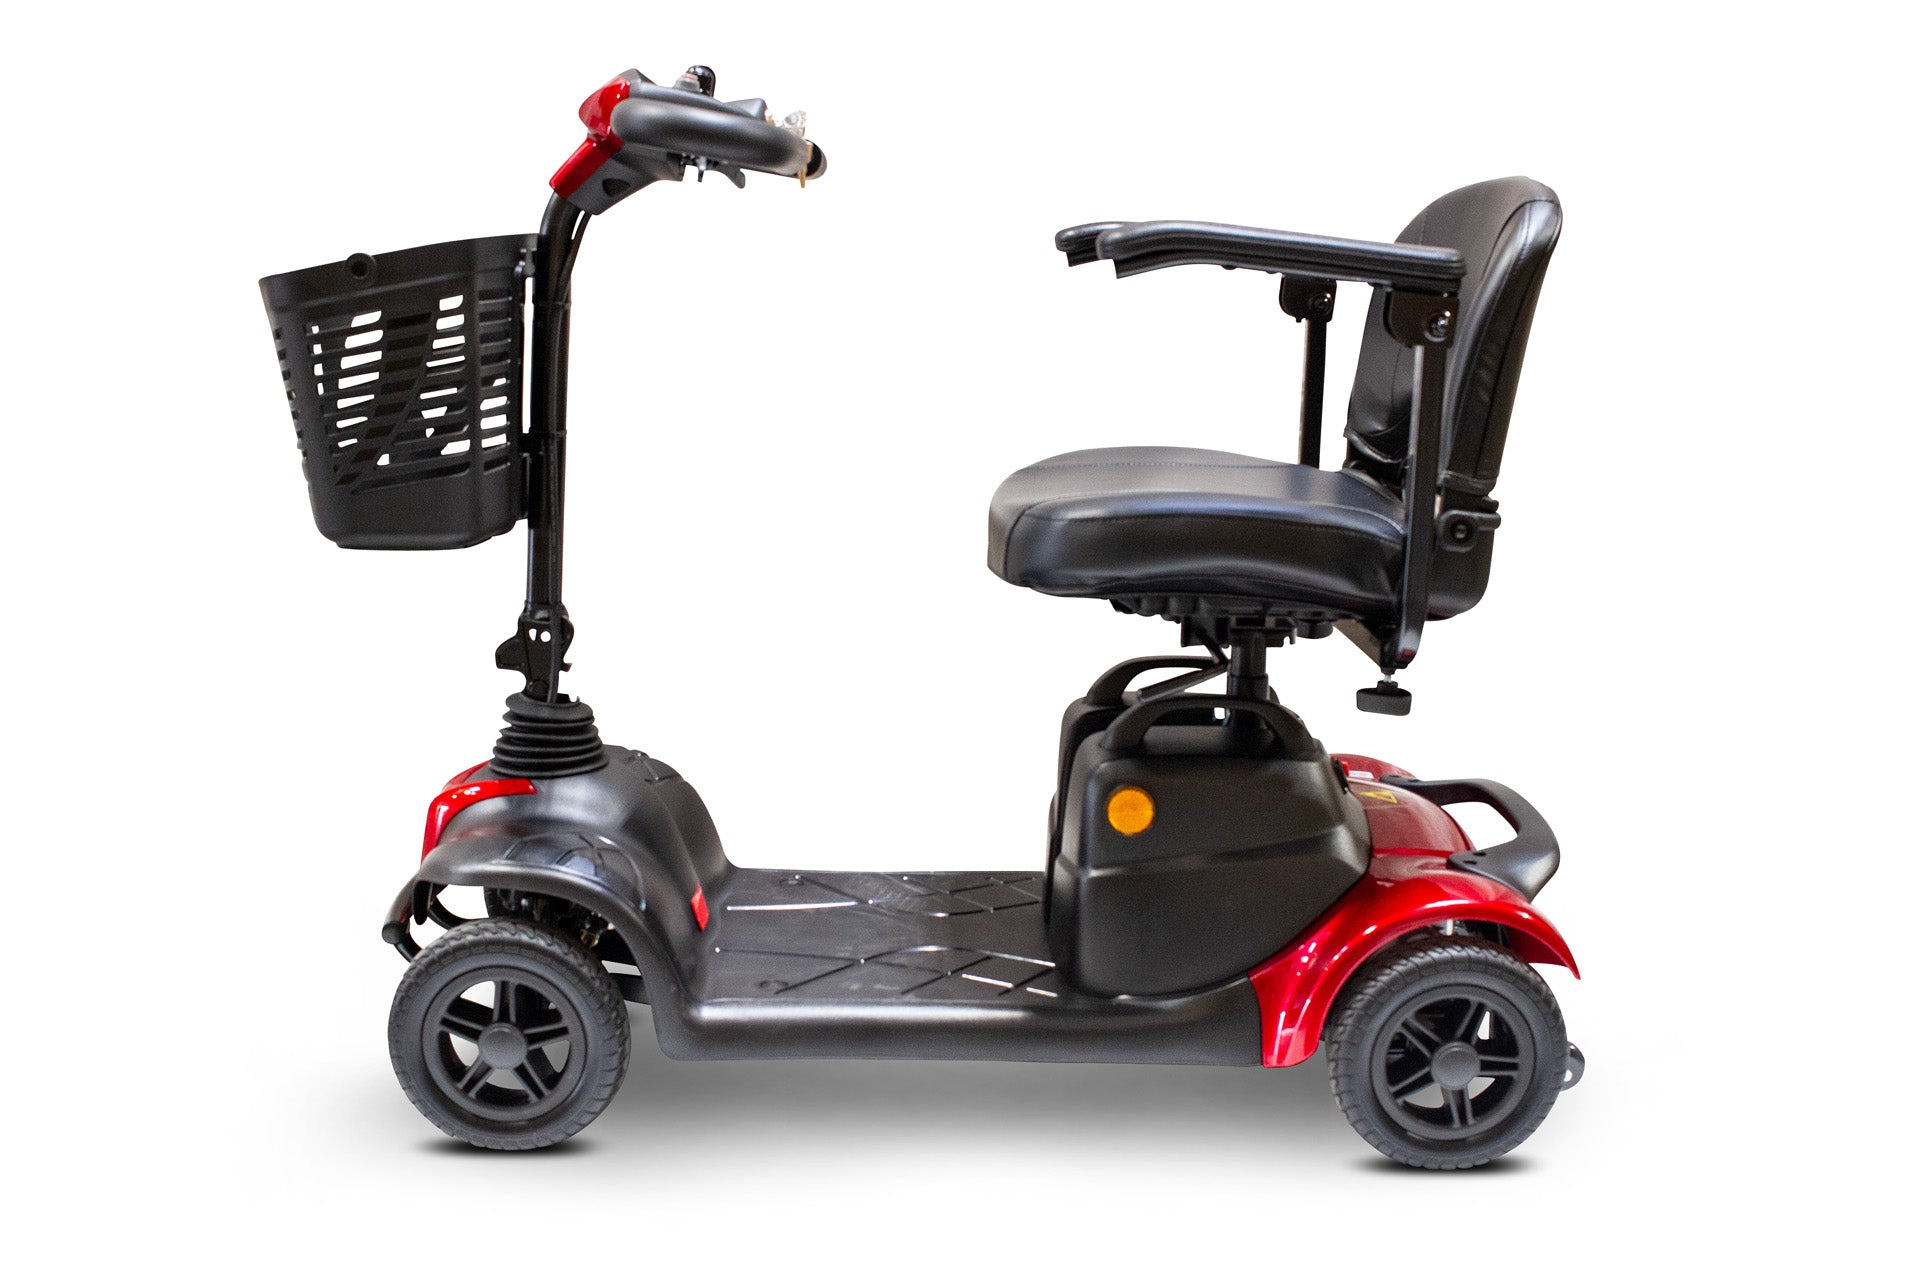 eWheels - 4 Wheels Medical Mobility Scooter - 300lbs Weight Capacity - EW-M39